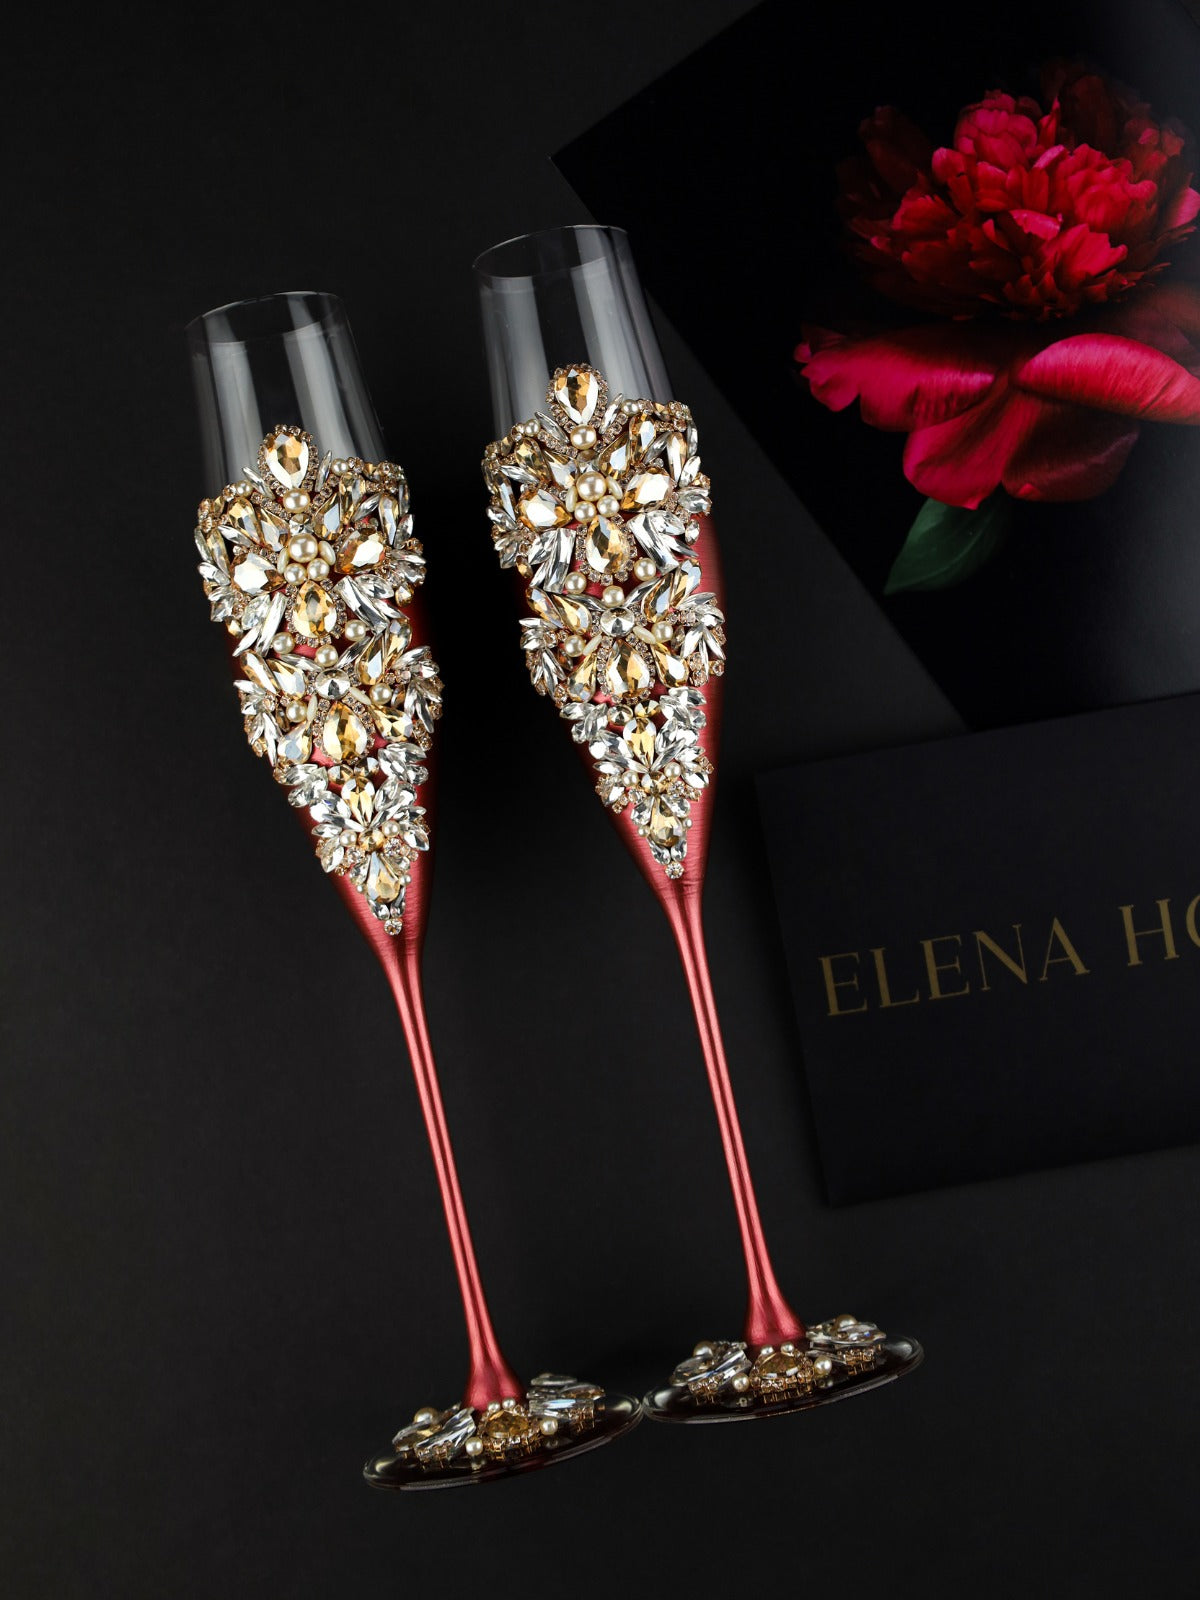 Burgundy champagne flutes and pillow for rings